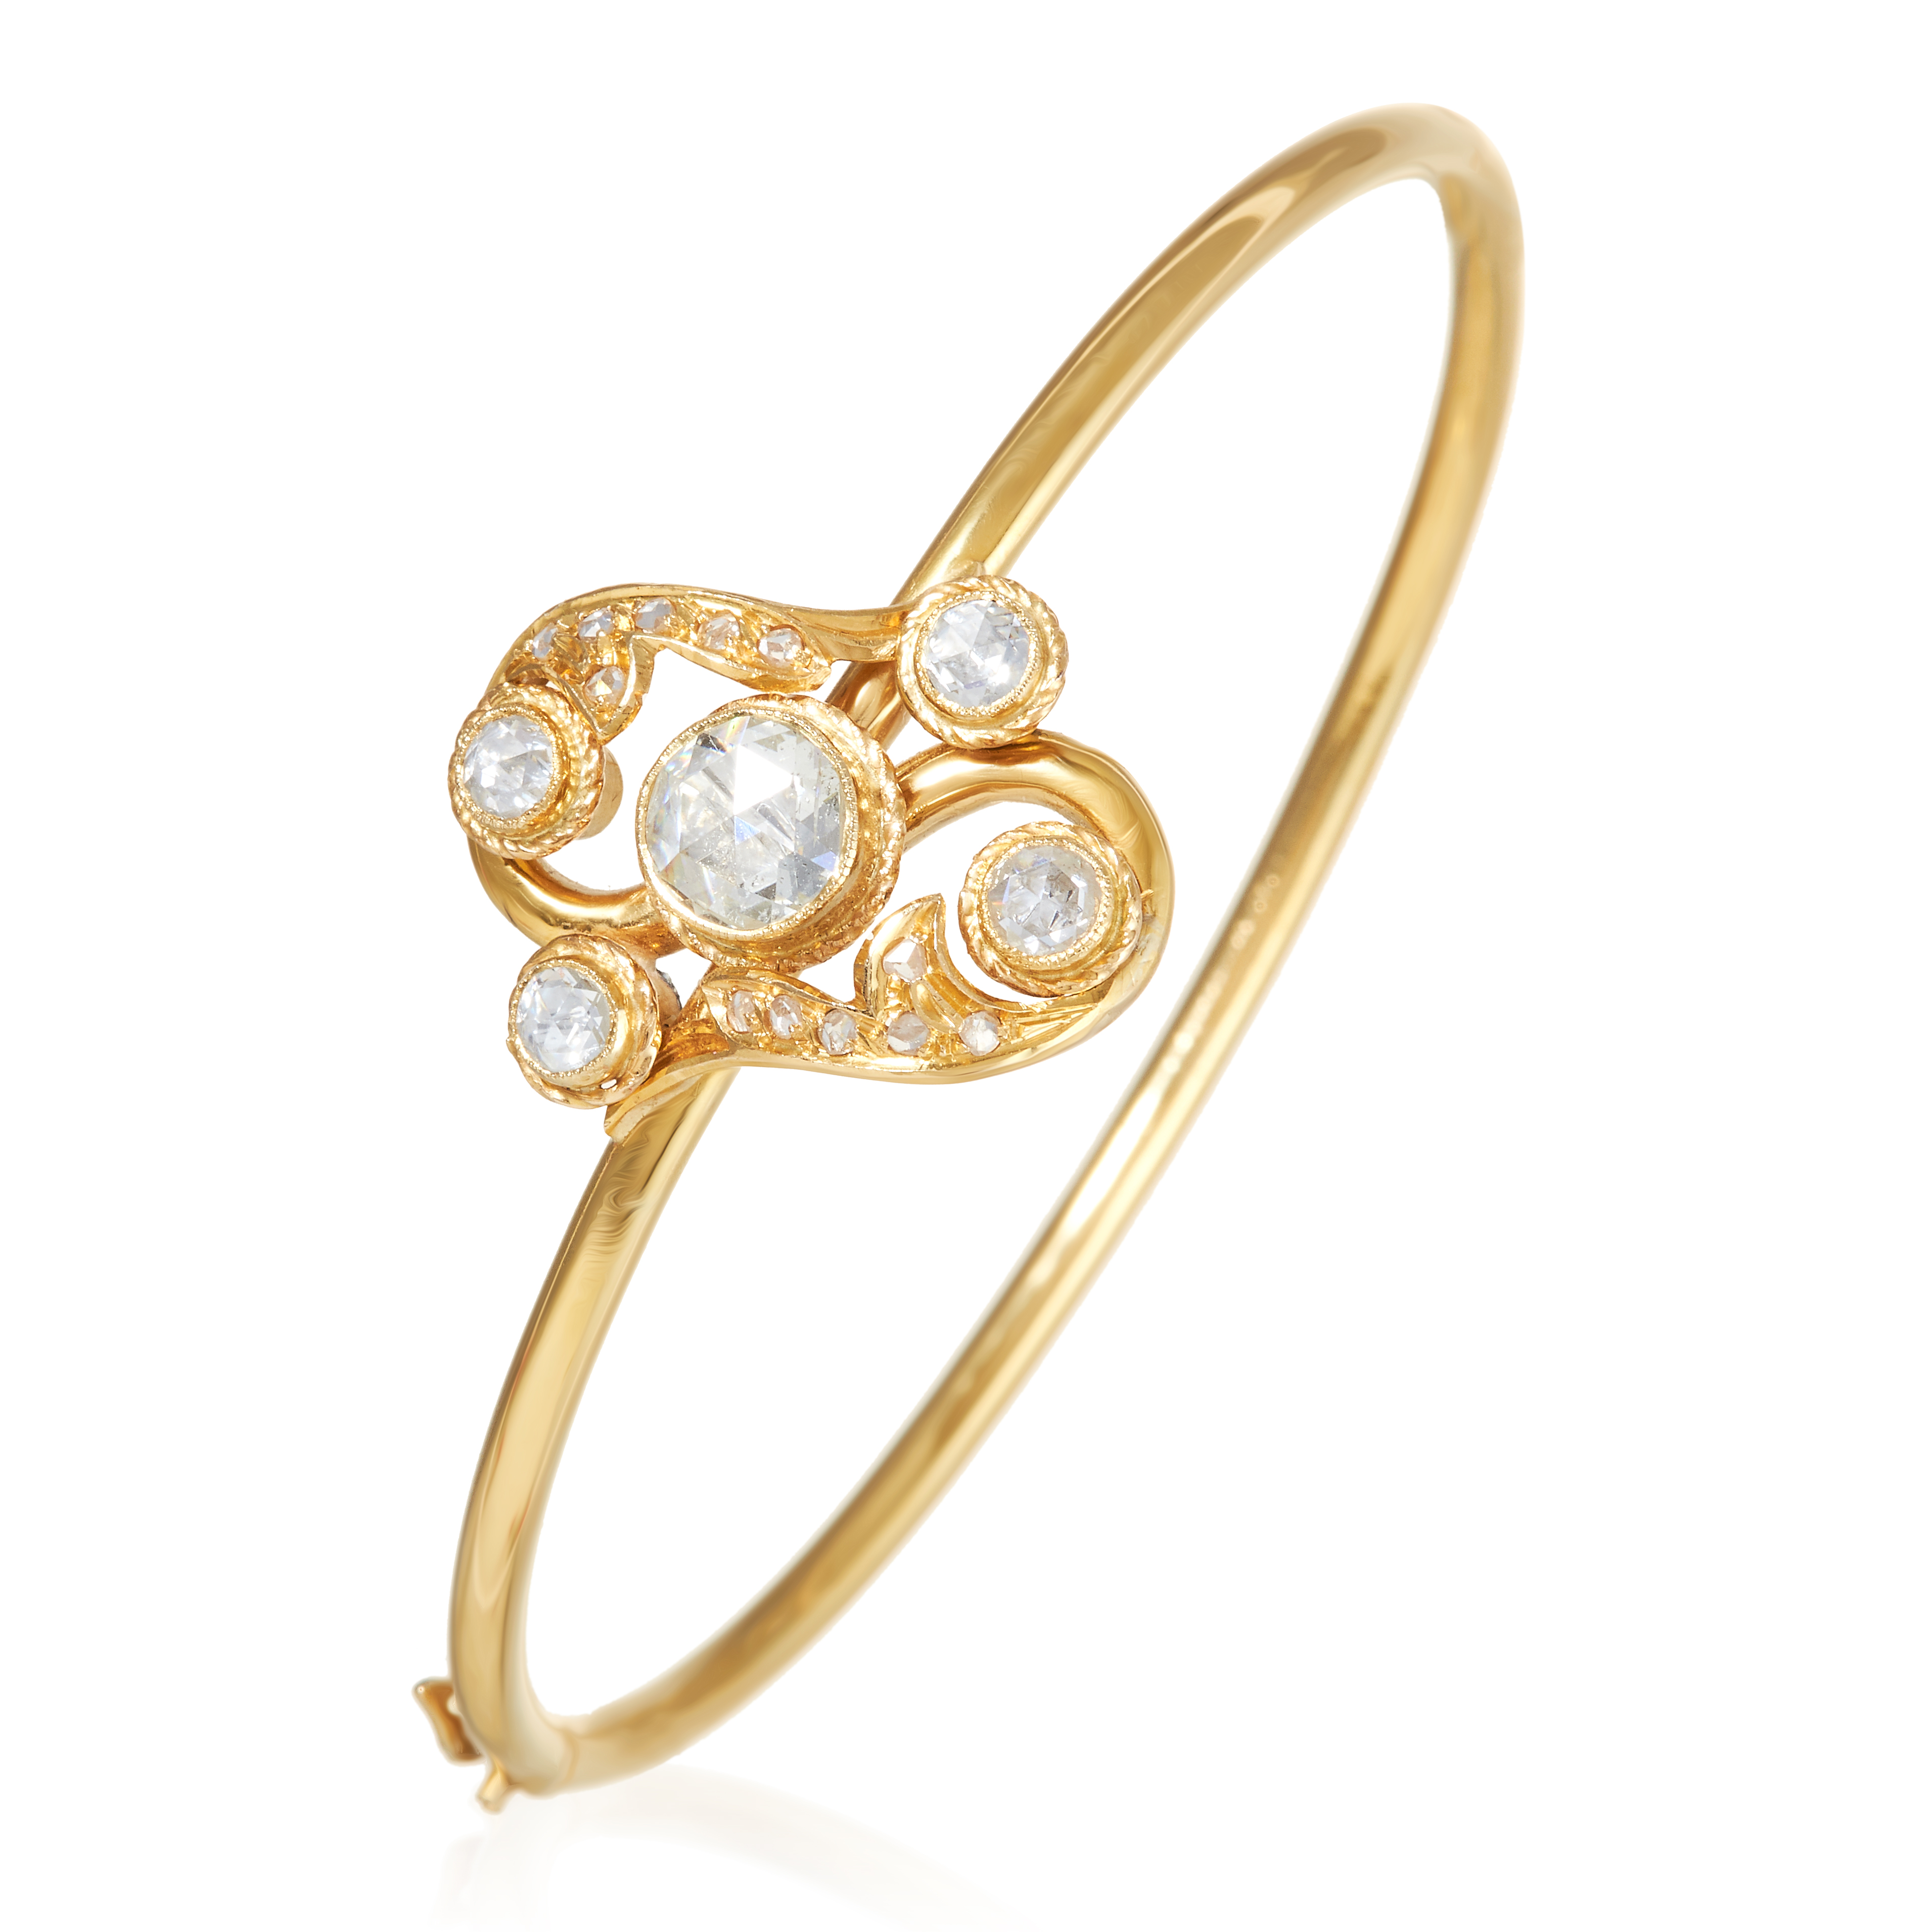 AN ANTIQUE DIAMOND BANGLE in high carat yellow gold, the Art Nouveau design formed of a scrolling